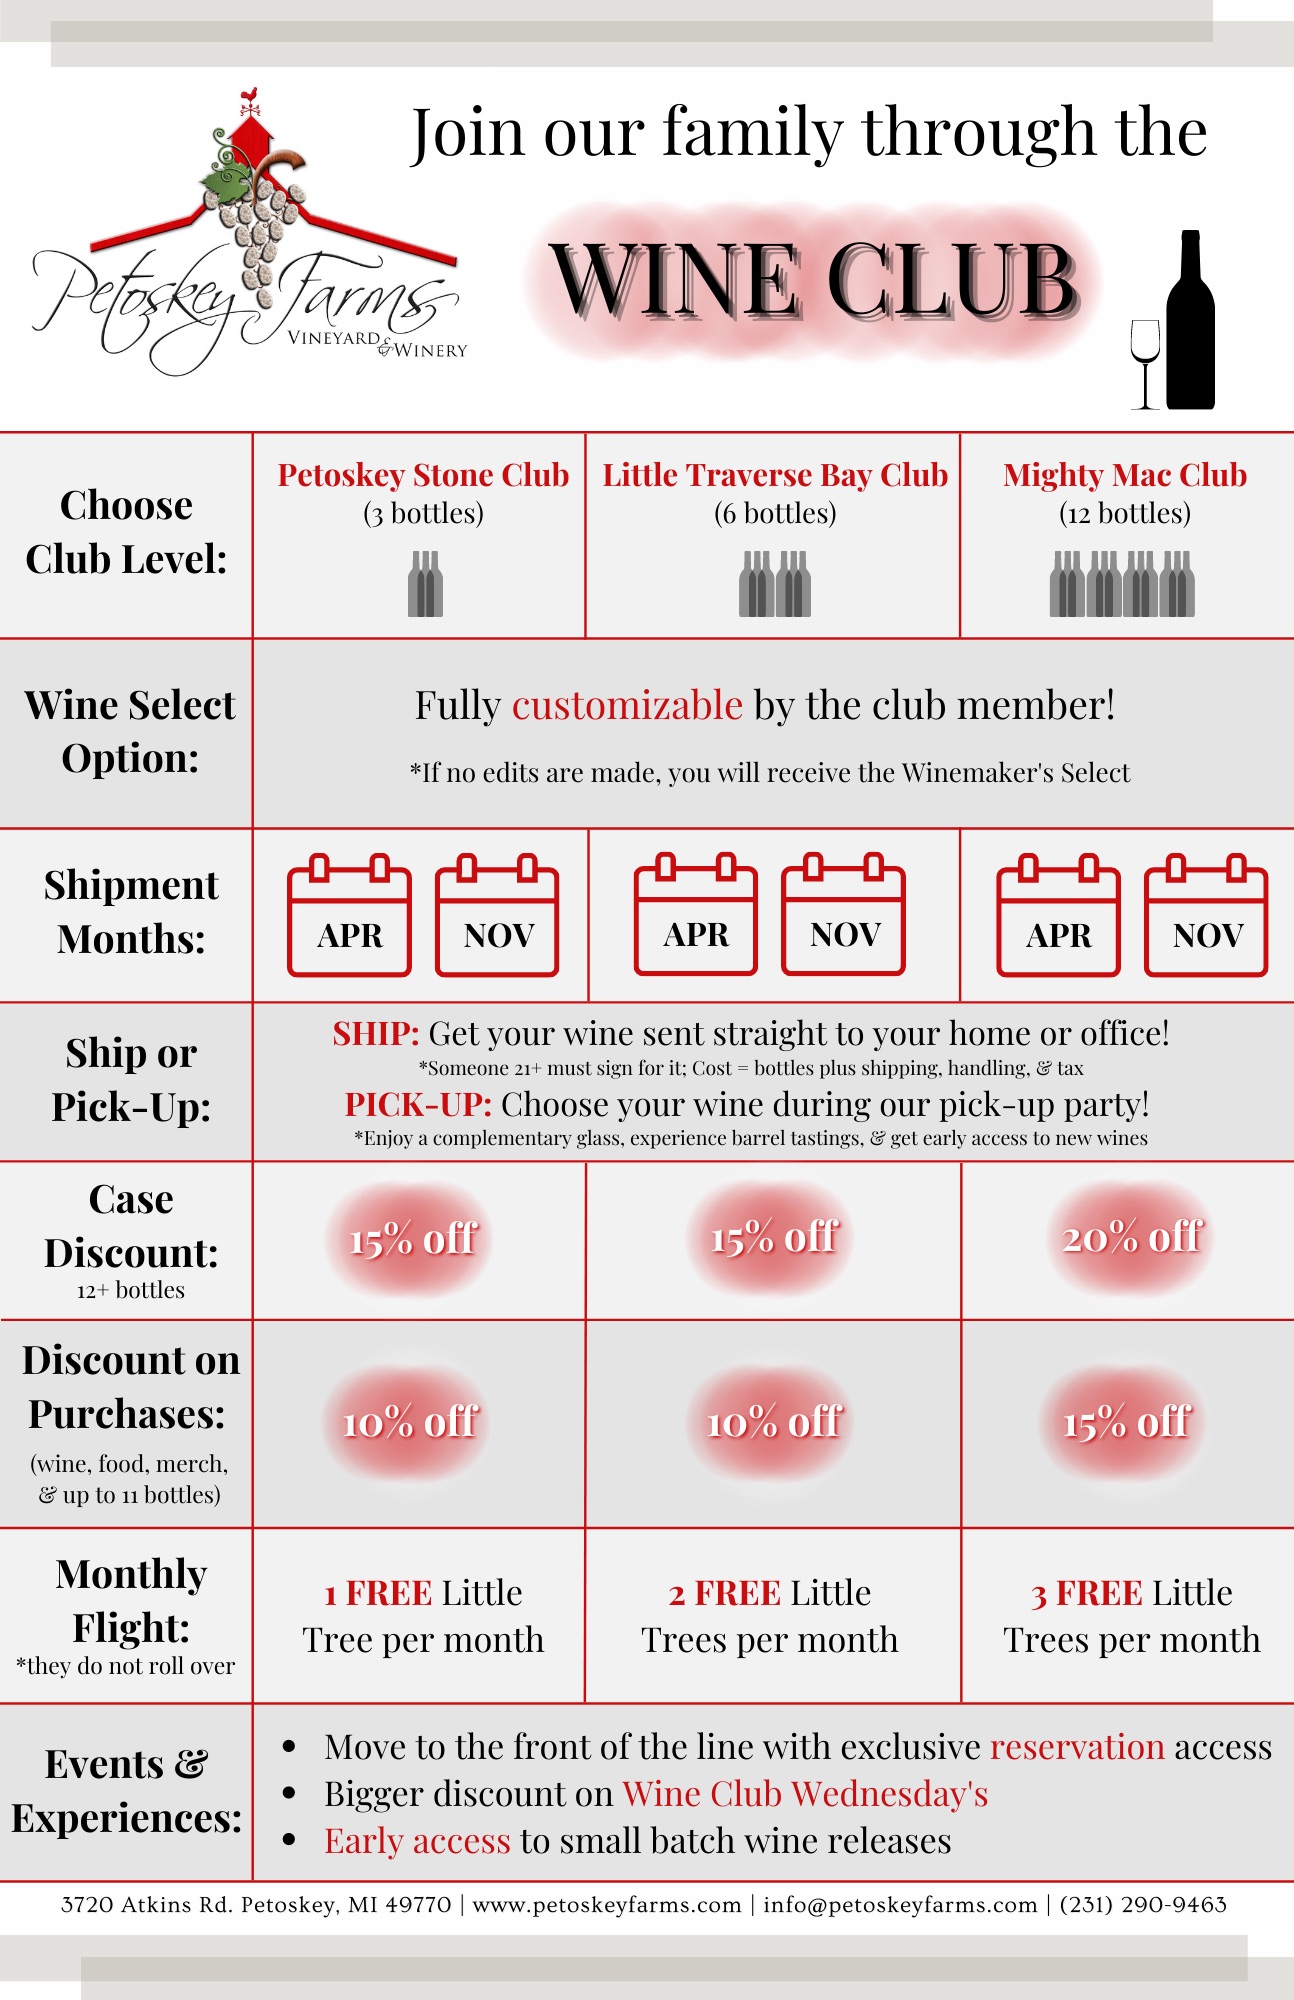 An overview of wine club membership benefits.